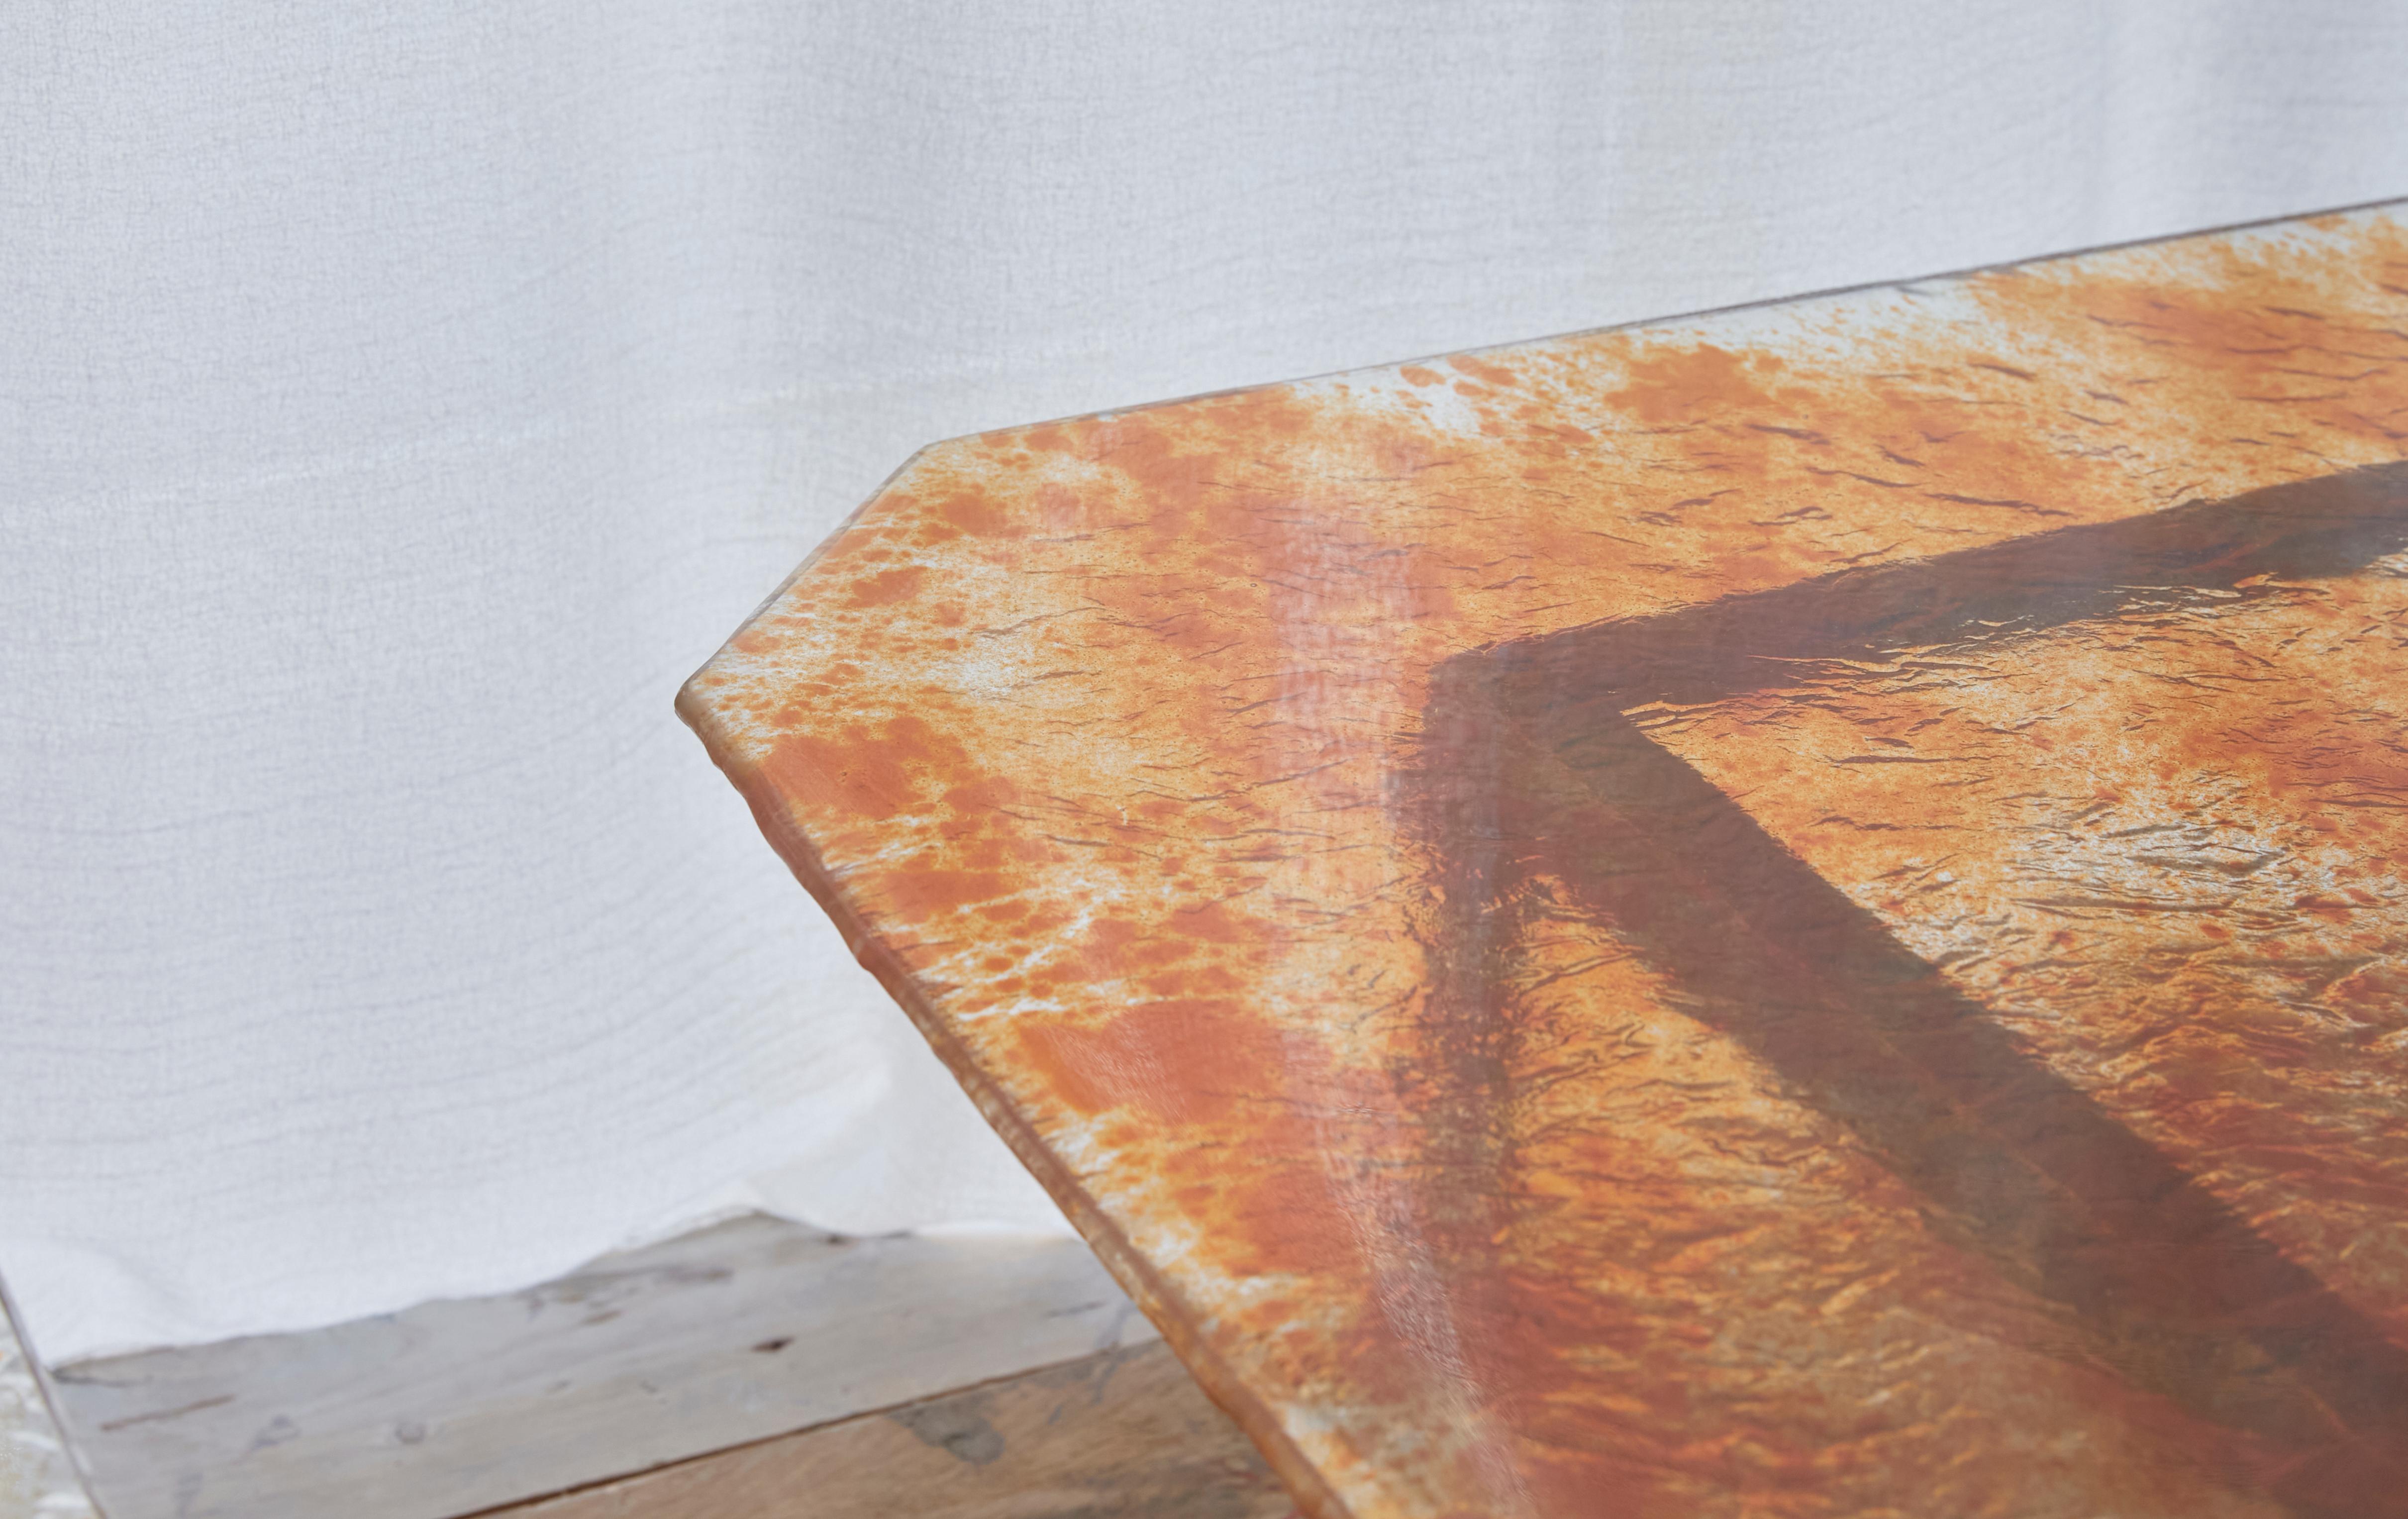 Low sculptural table with hand-carved bronze structure by spanish artist José Onieva and 6mm handmade glass, with pigment melted at high temperature to achieve this distortion of color and irregular texture  when in contact with the glass. The